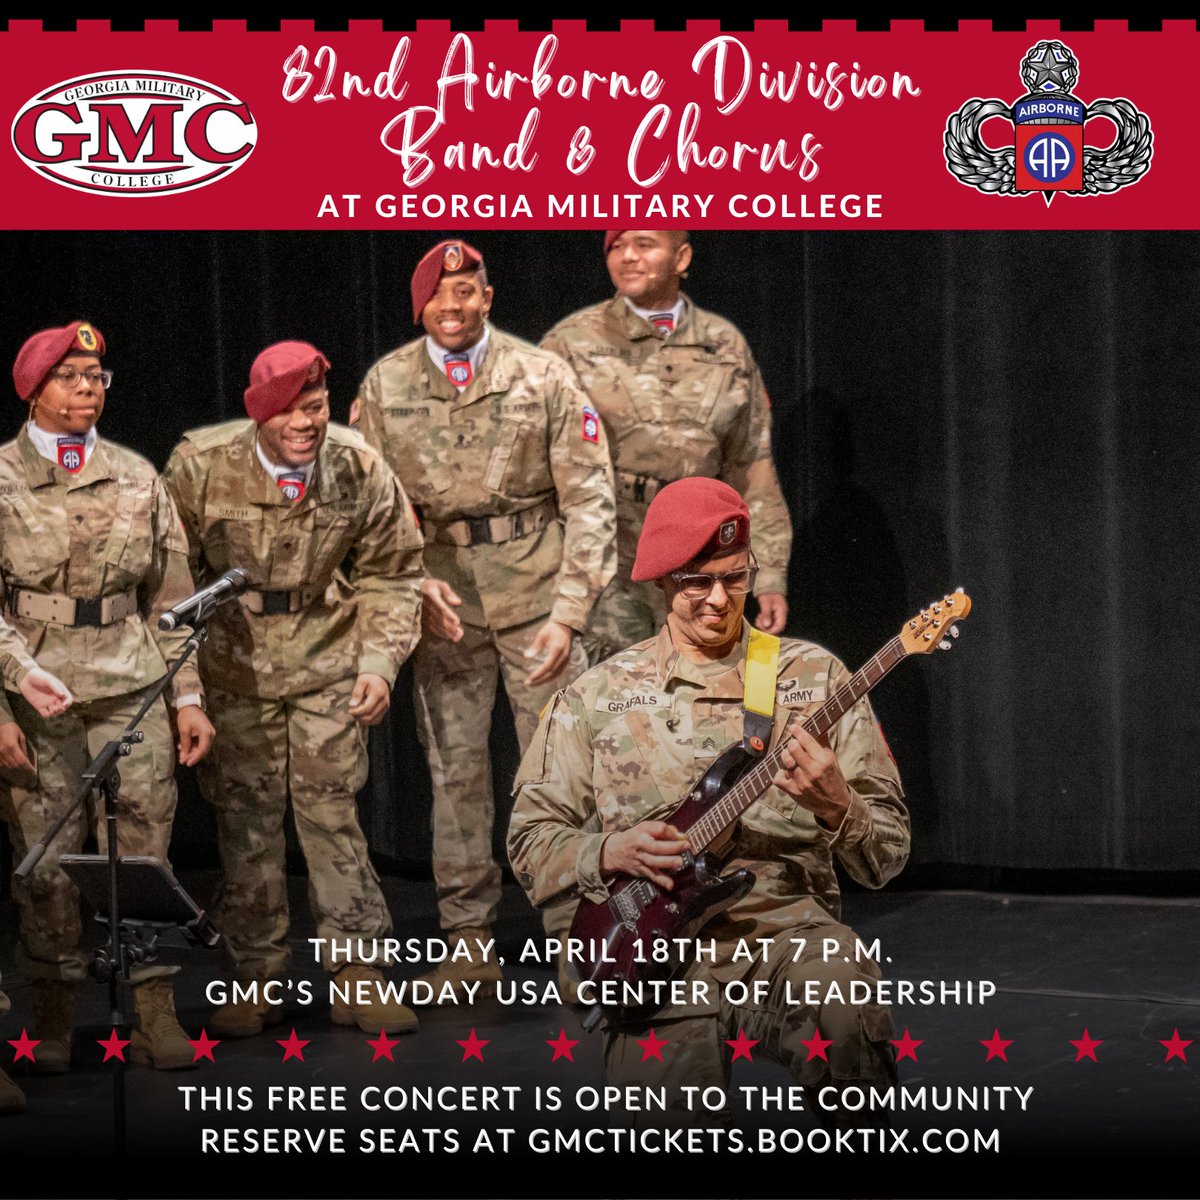 Experience musical talent with the renowned 82nd Airborne Division Band & Chorus! 🎶 Mark your calendars for Thursday, April 18th, 7 p.m. at Georgia Military College's NewDay USA Center of Leadership.